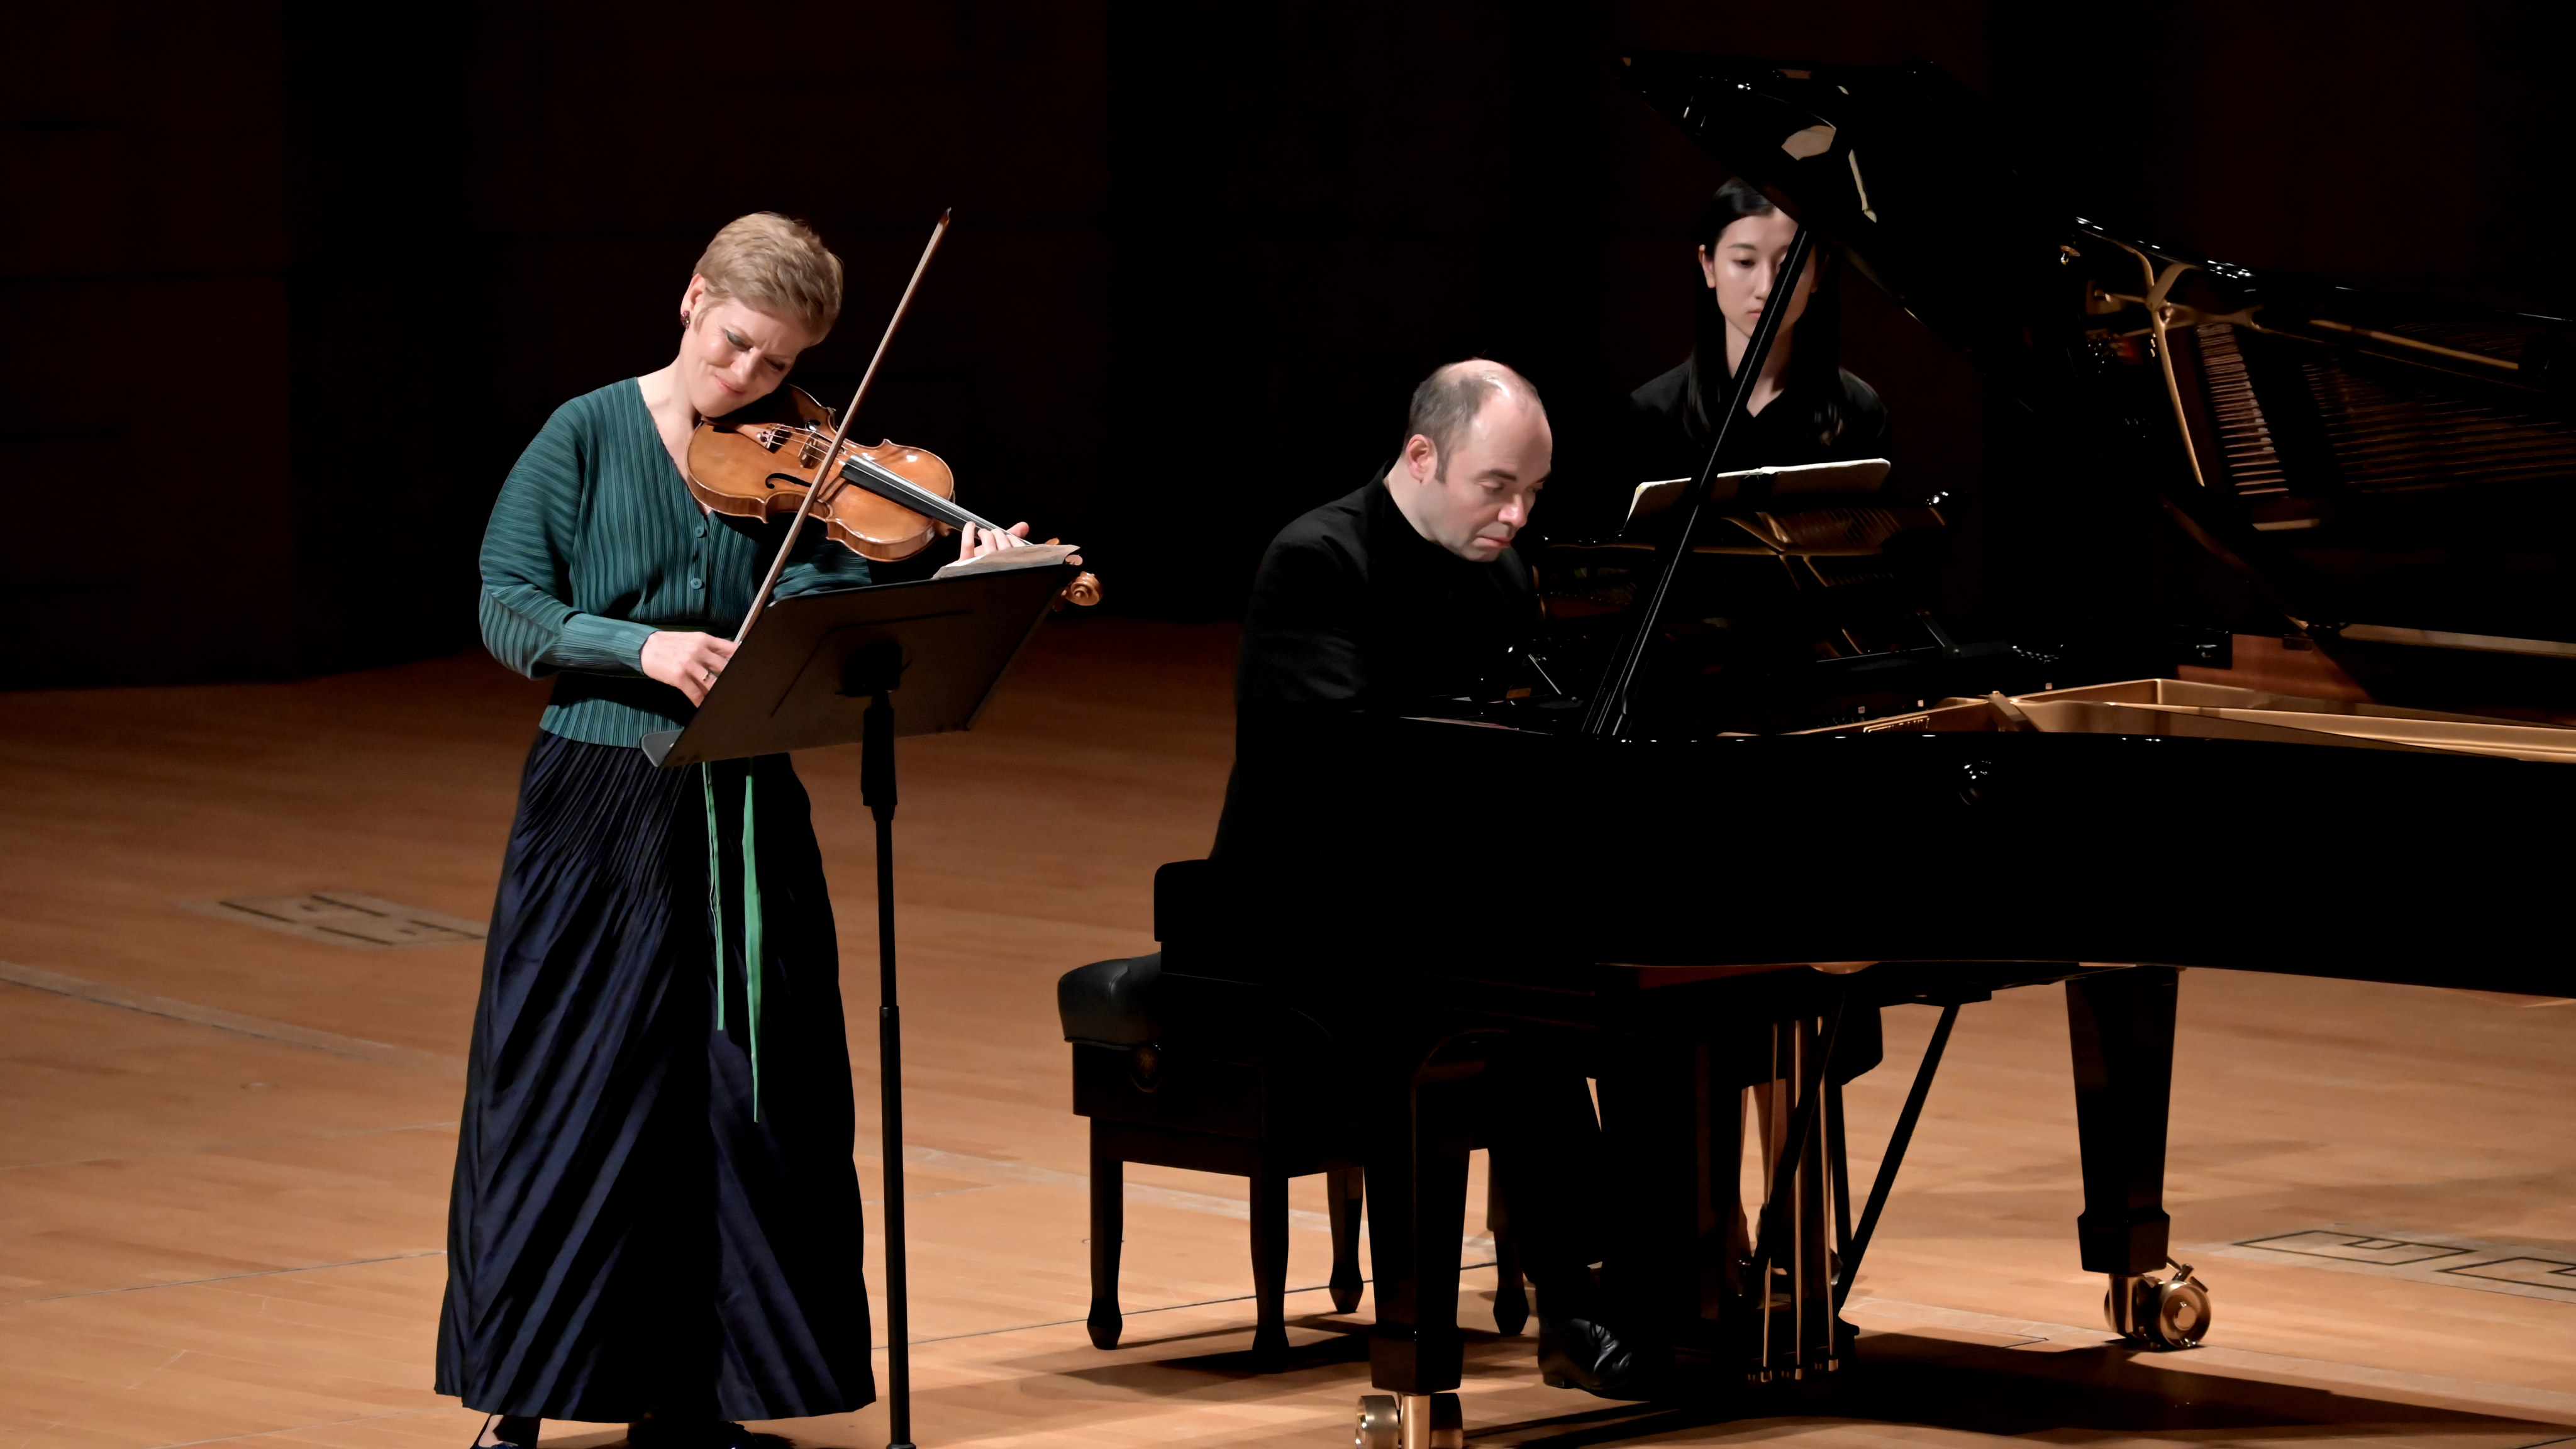 German violinist Isabelle Faust and Russian pianist Alexander Melnikov perform during their cycle of three concerts presenting Beethoven’s 10 sonatas for violin and piano in the Grand Hall of the Lee Shau Kee Lecture Centre at the University of Hong Kong. Photo: HKU Muse